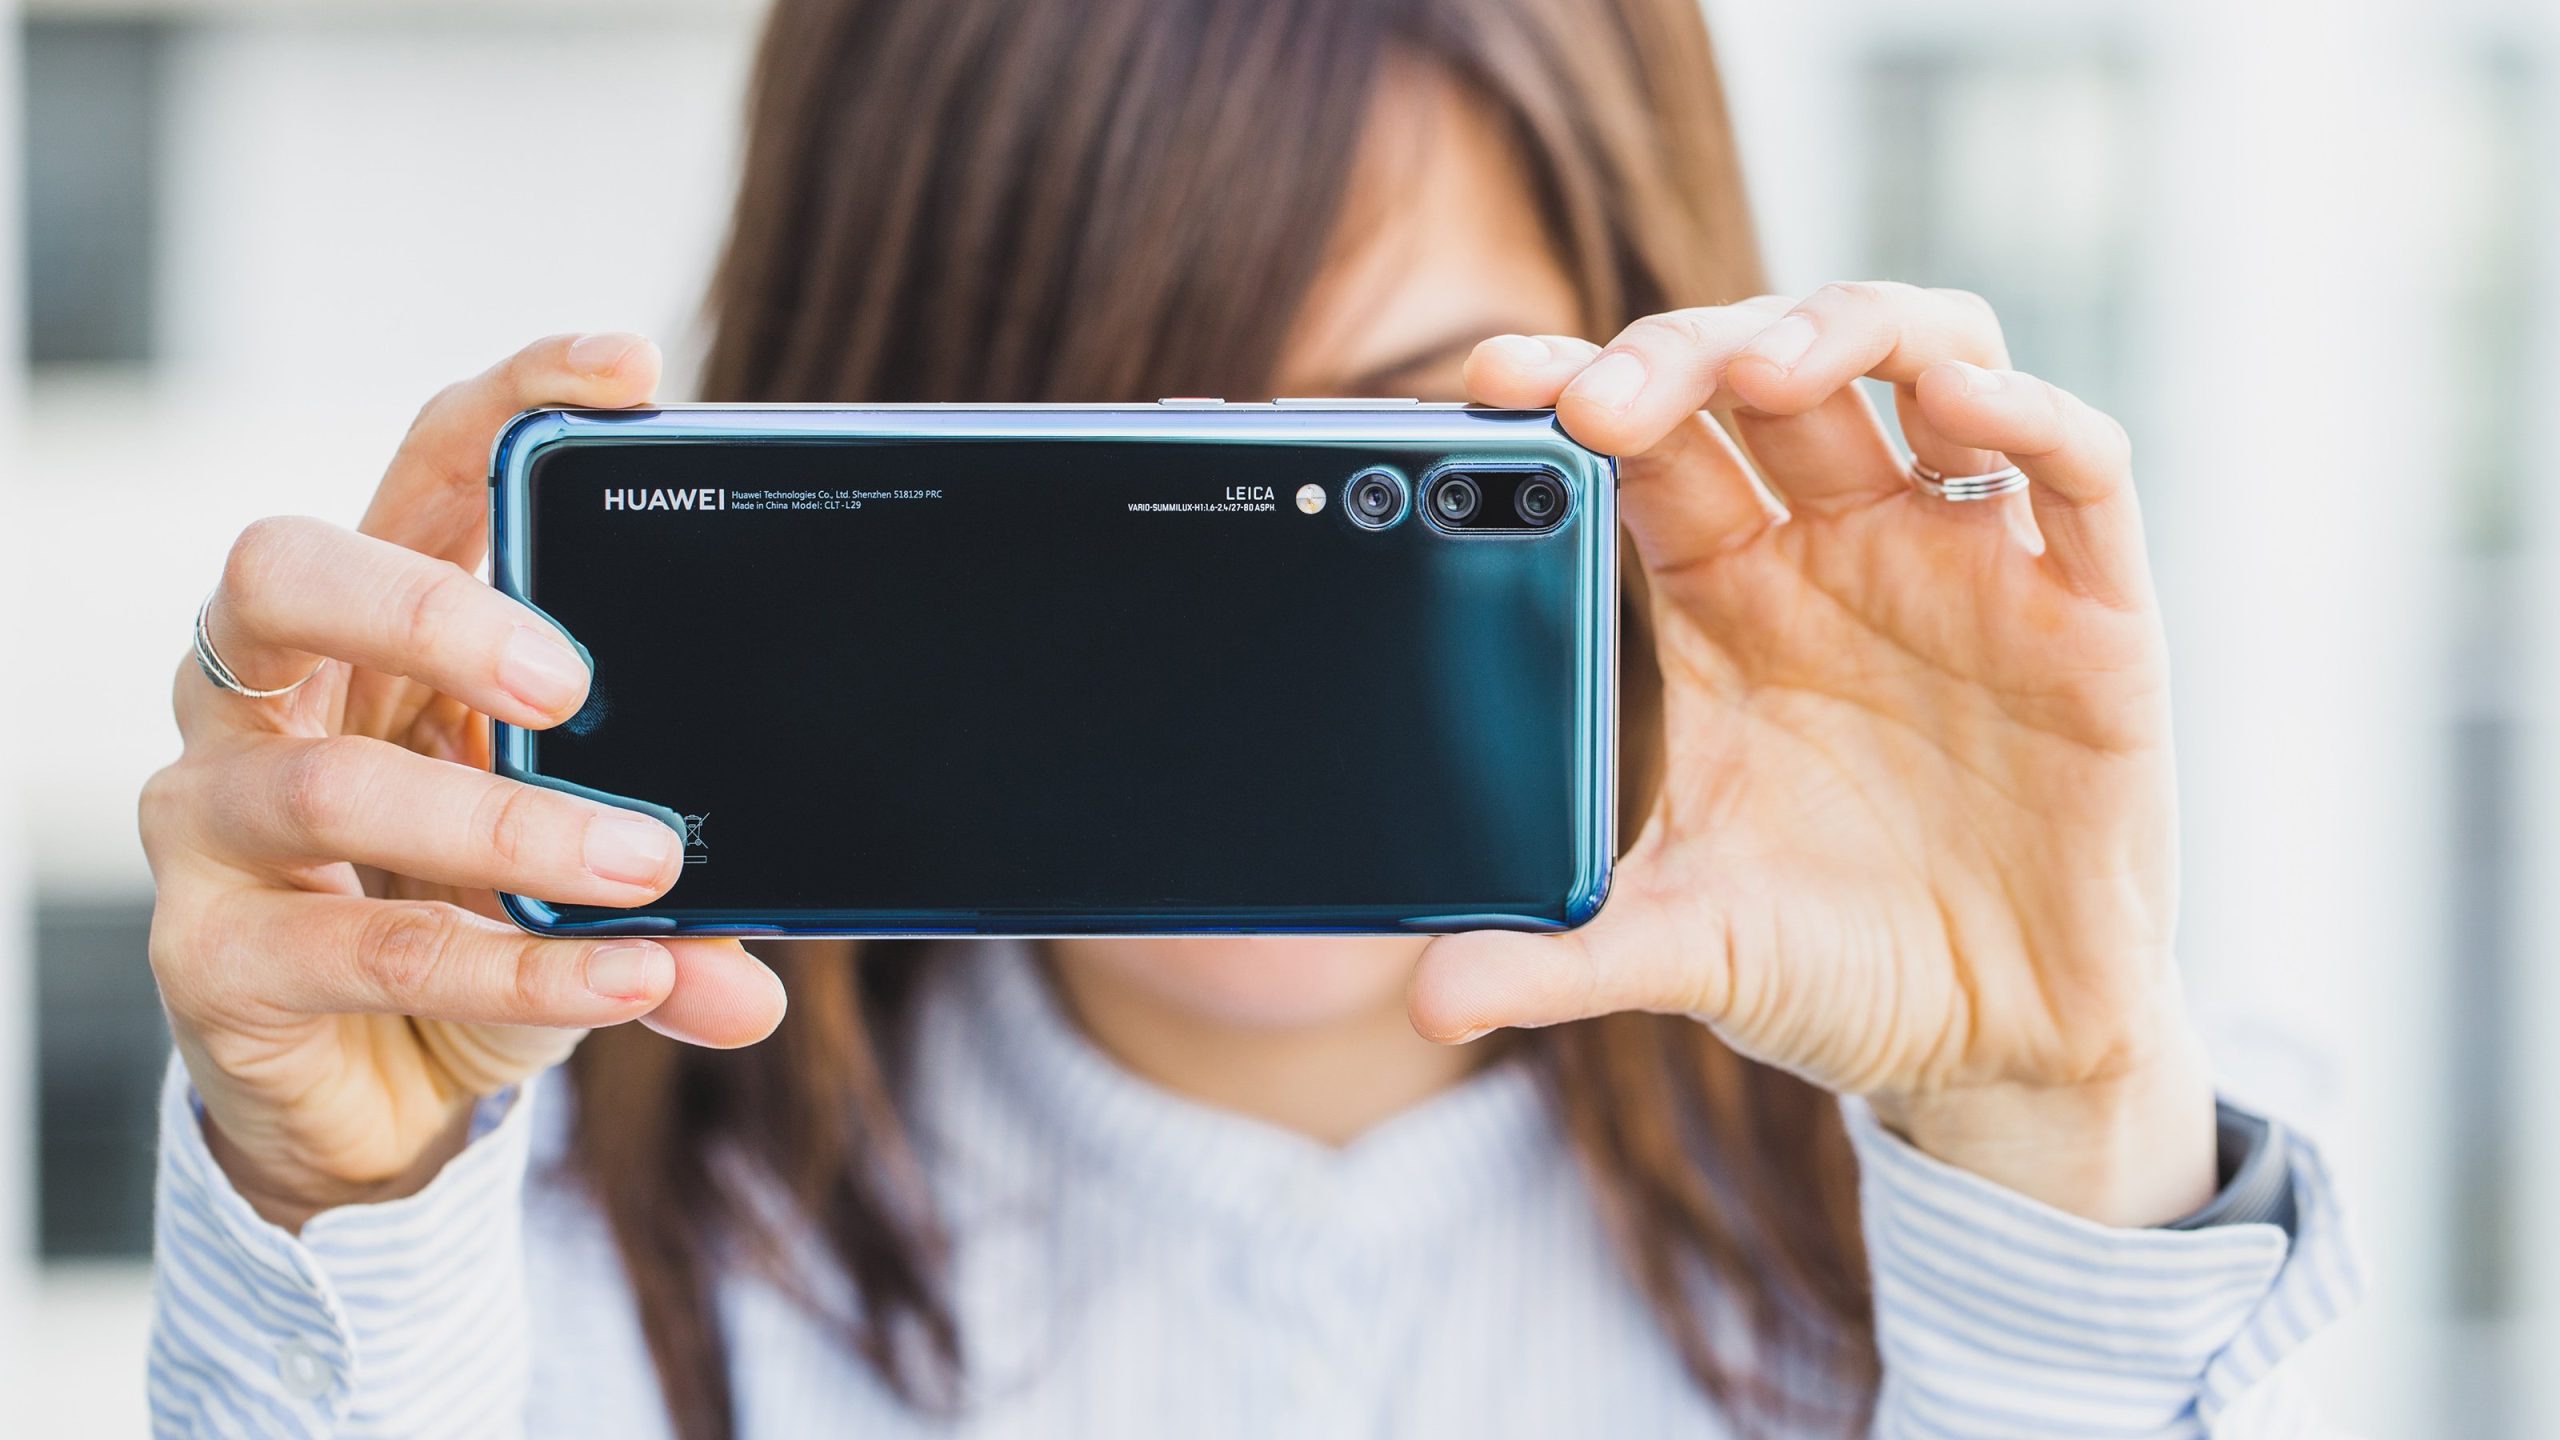 10 Tips on How to take Great Photos With Your Phone